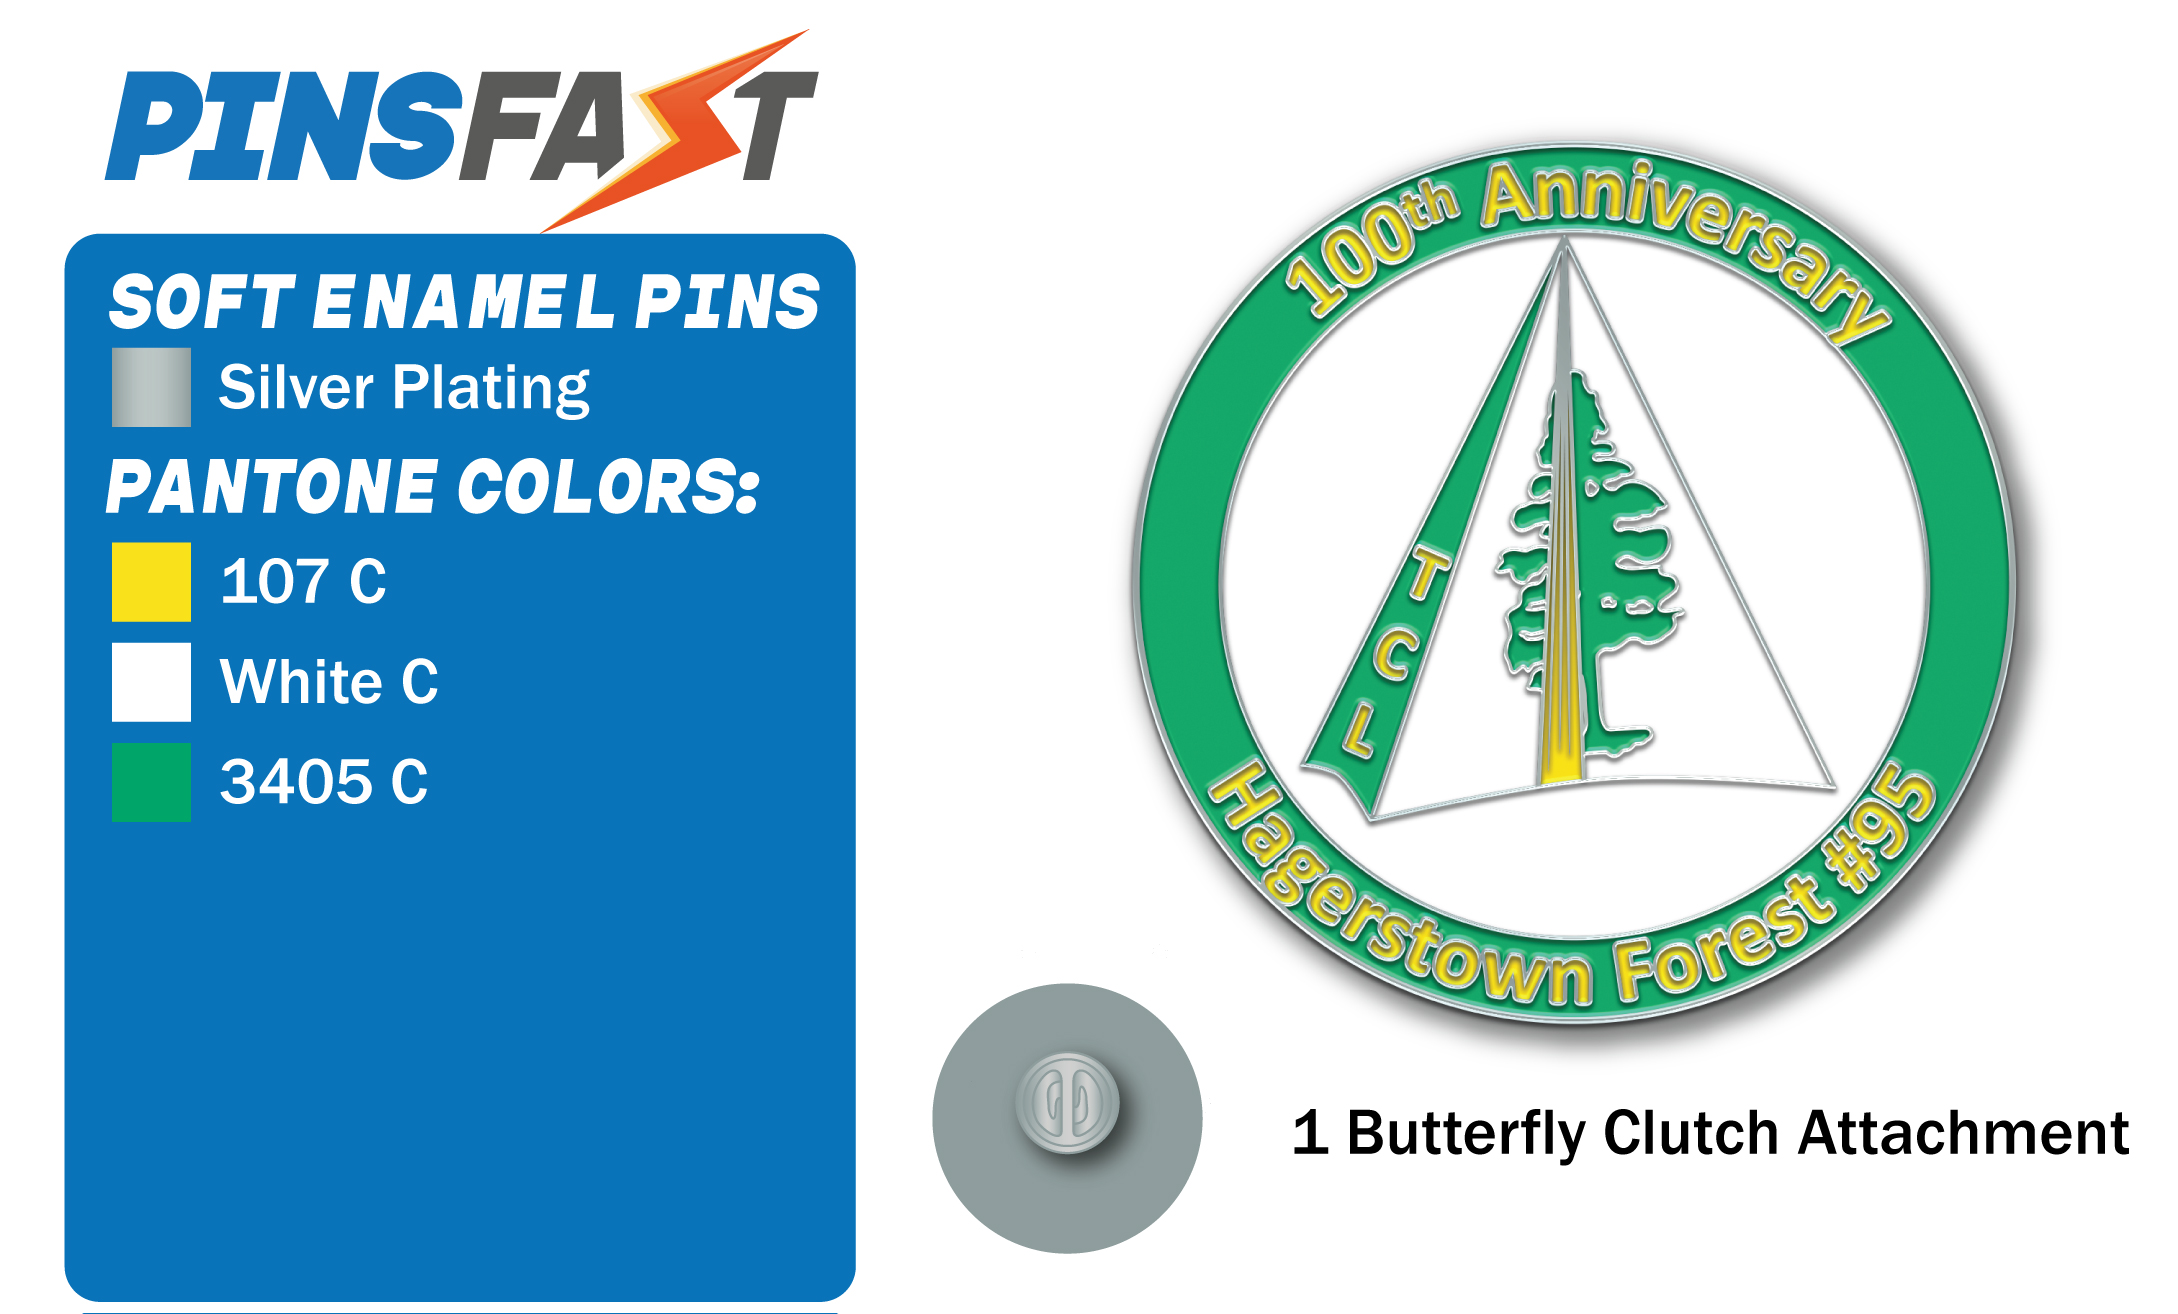 Hagertown Forest Pins